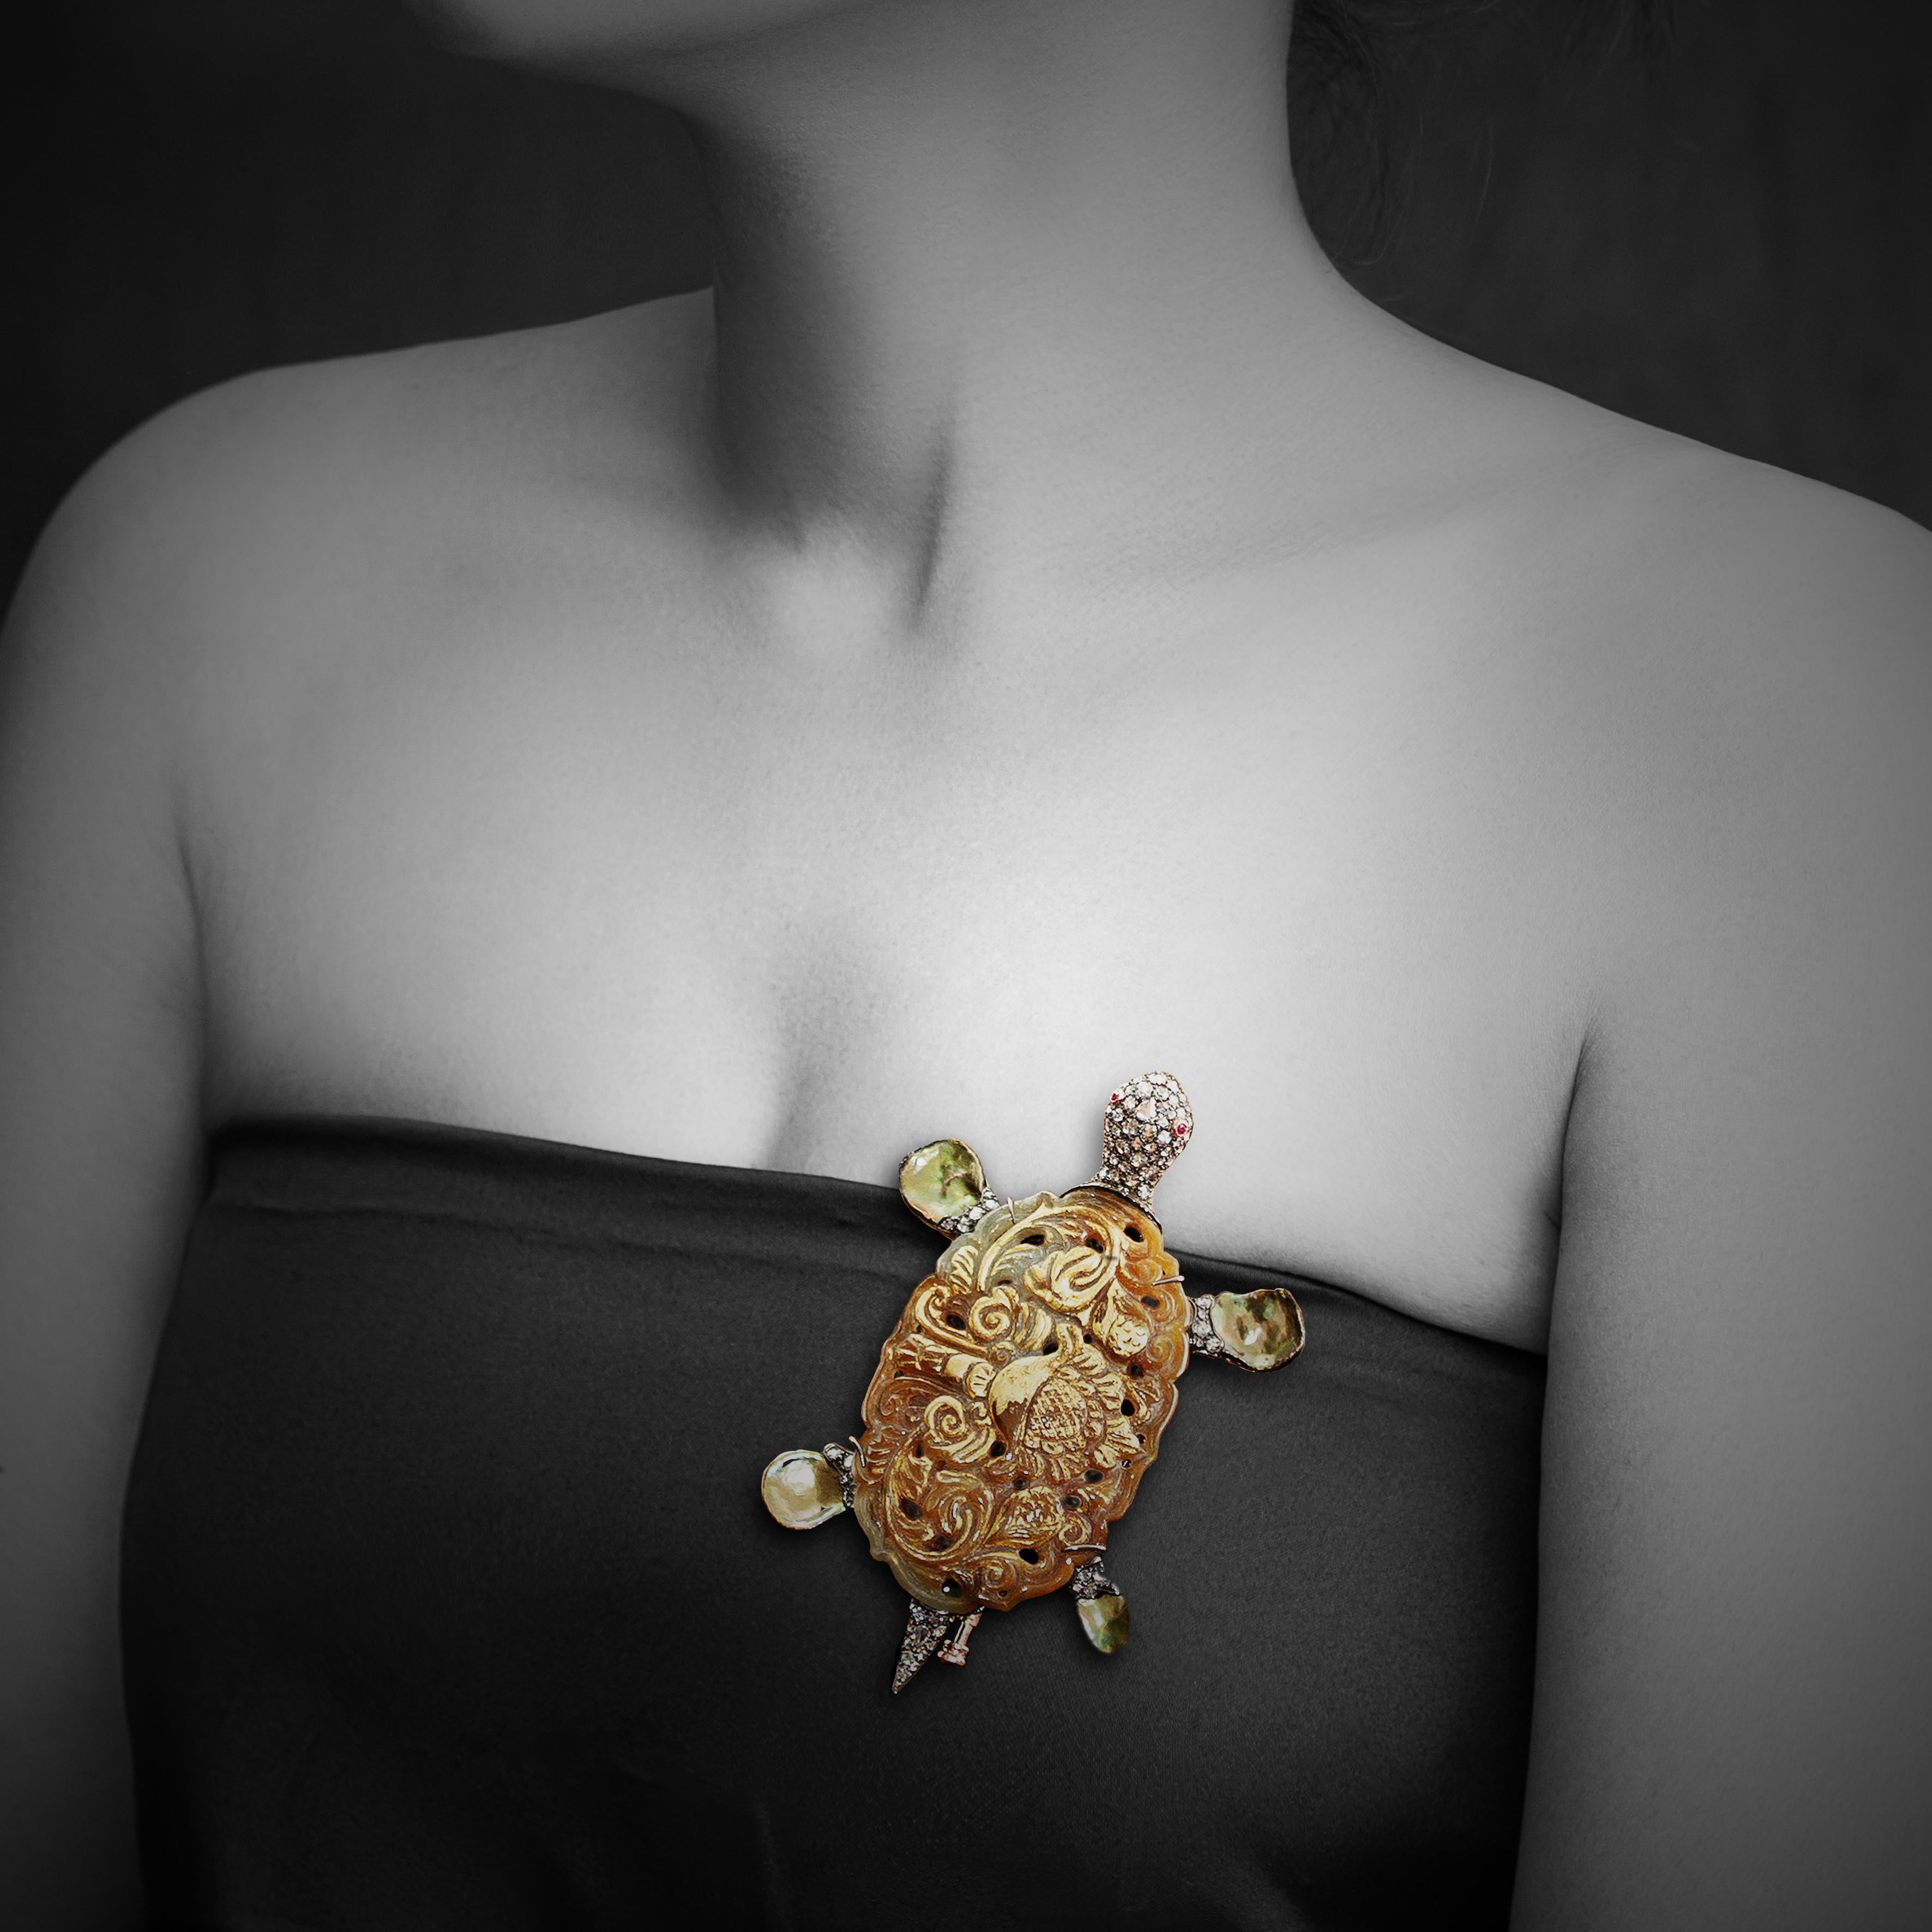 We dedicated this beautiful brooch to the wonder and beauty of sea turtles. This turtle brooch is combined with carved jade, keshi pearls, white rose-cut diamonds and rubies in the eyes. 
Designed to protect and preserve endangered sea turtle for